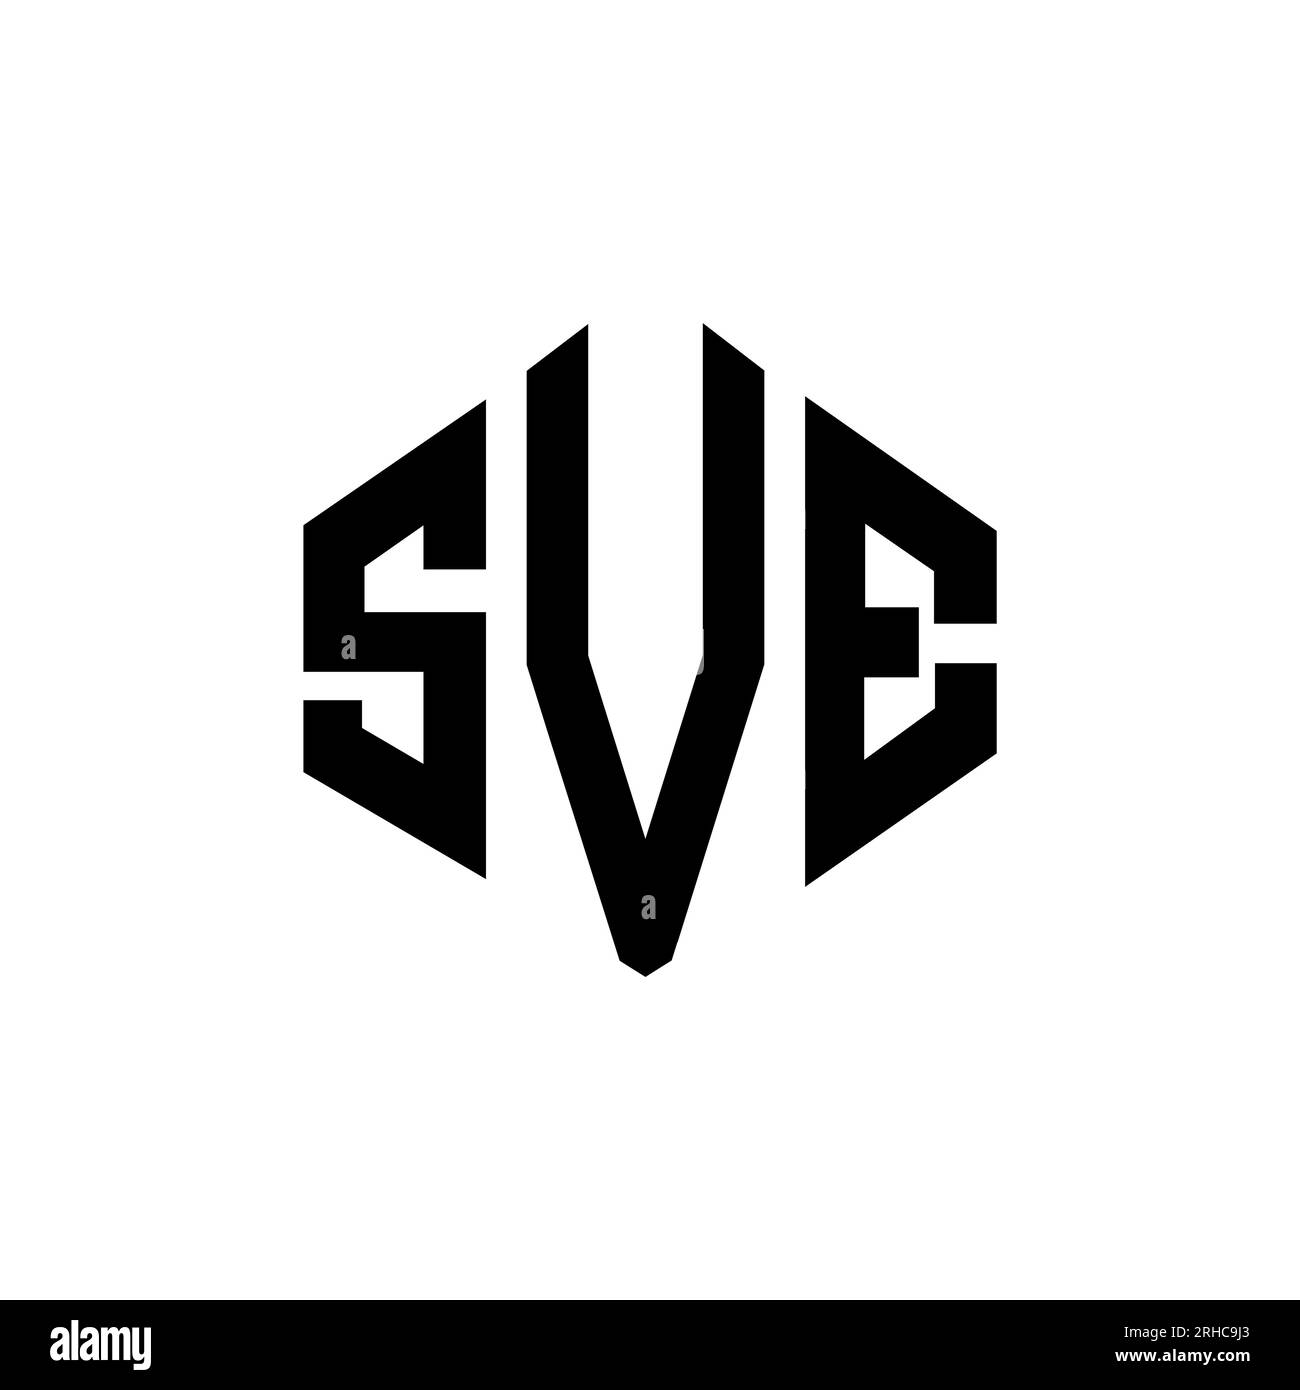 Svf logo Cut Out Stock Images & Pictures - Alamy